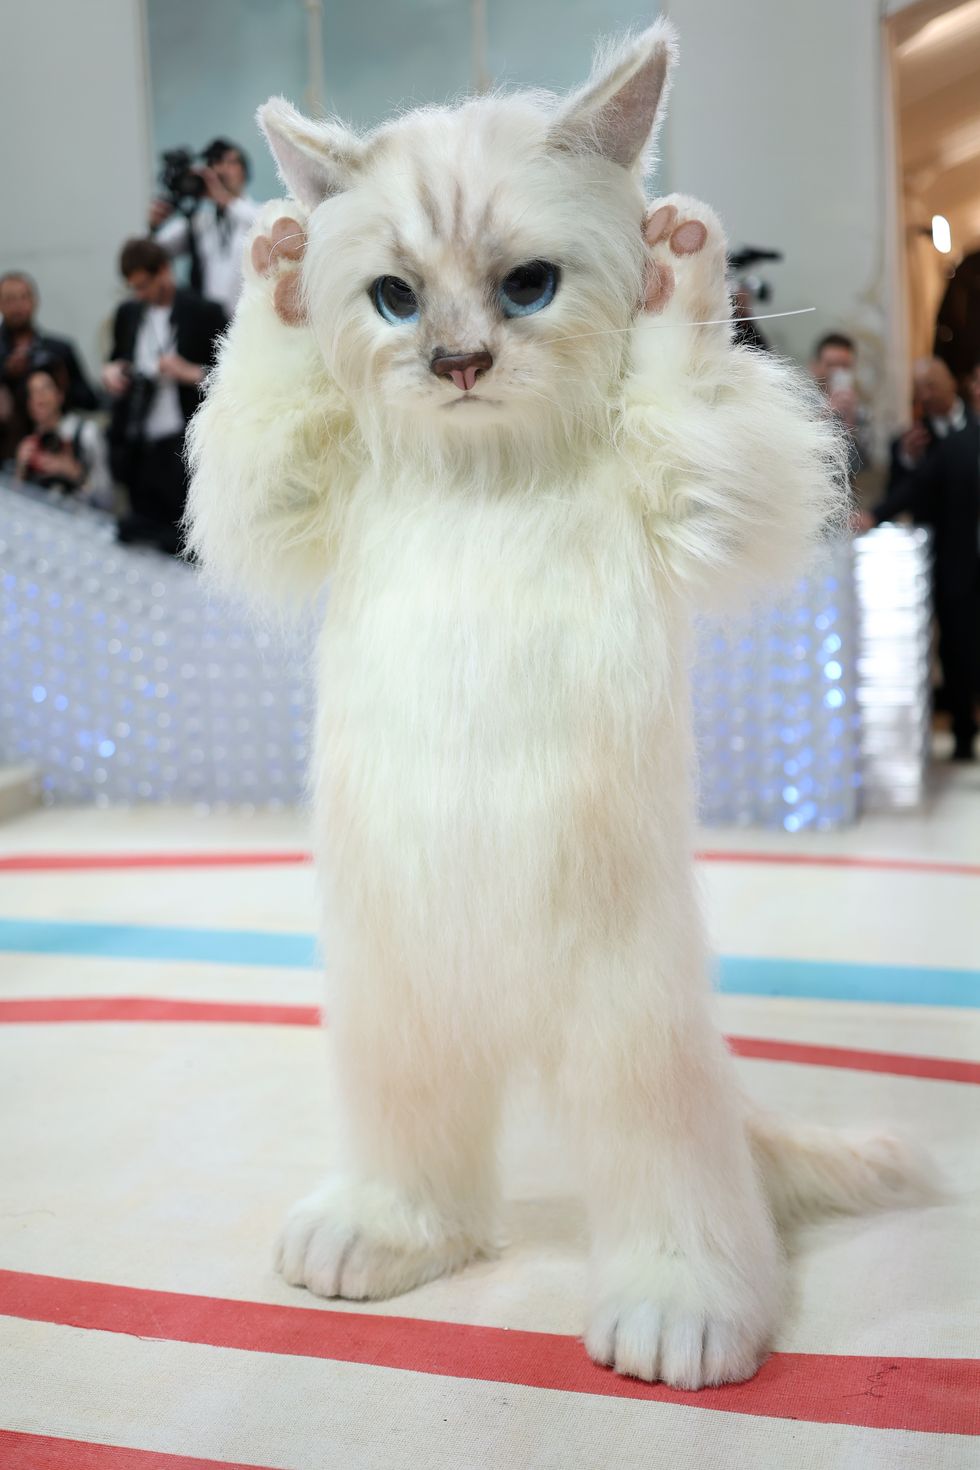 Jared Leto Dressed Up as Karl Lagerfeld's Cat Choupette at the 2023 Met Gala